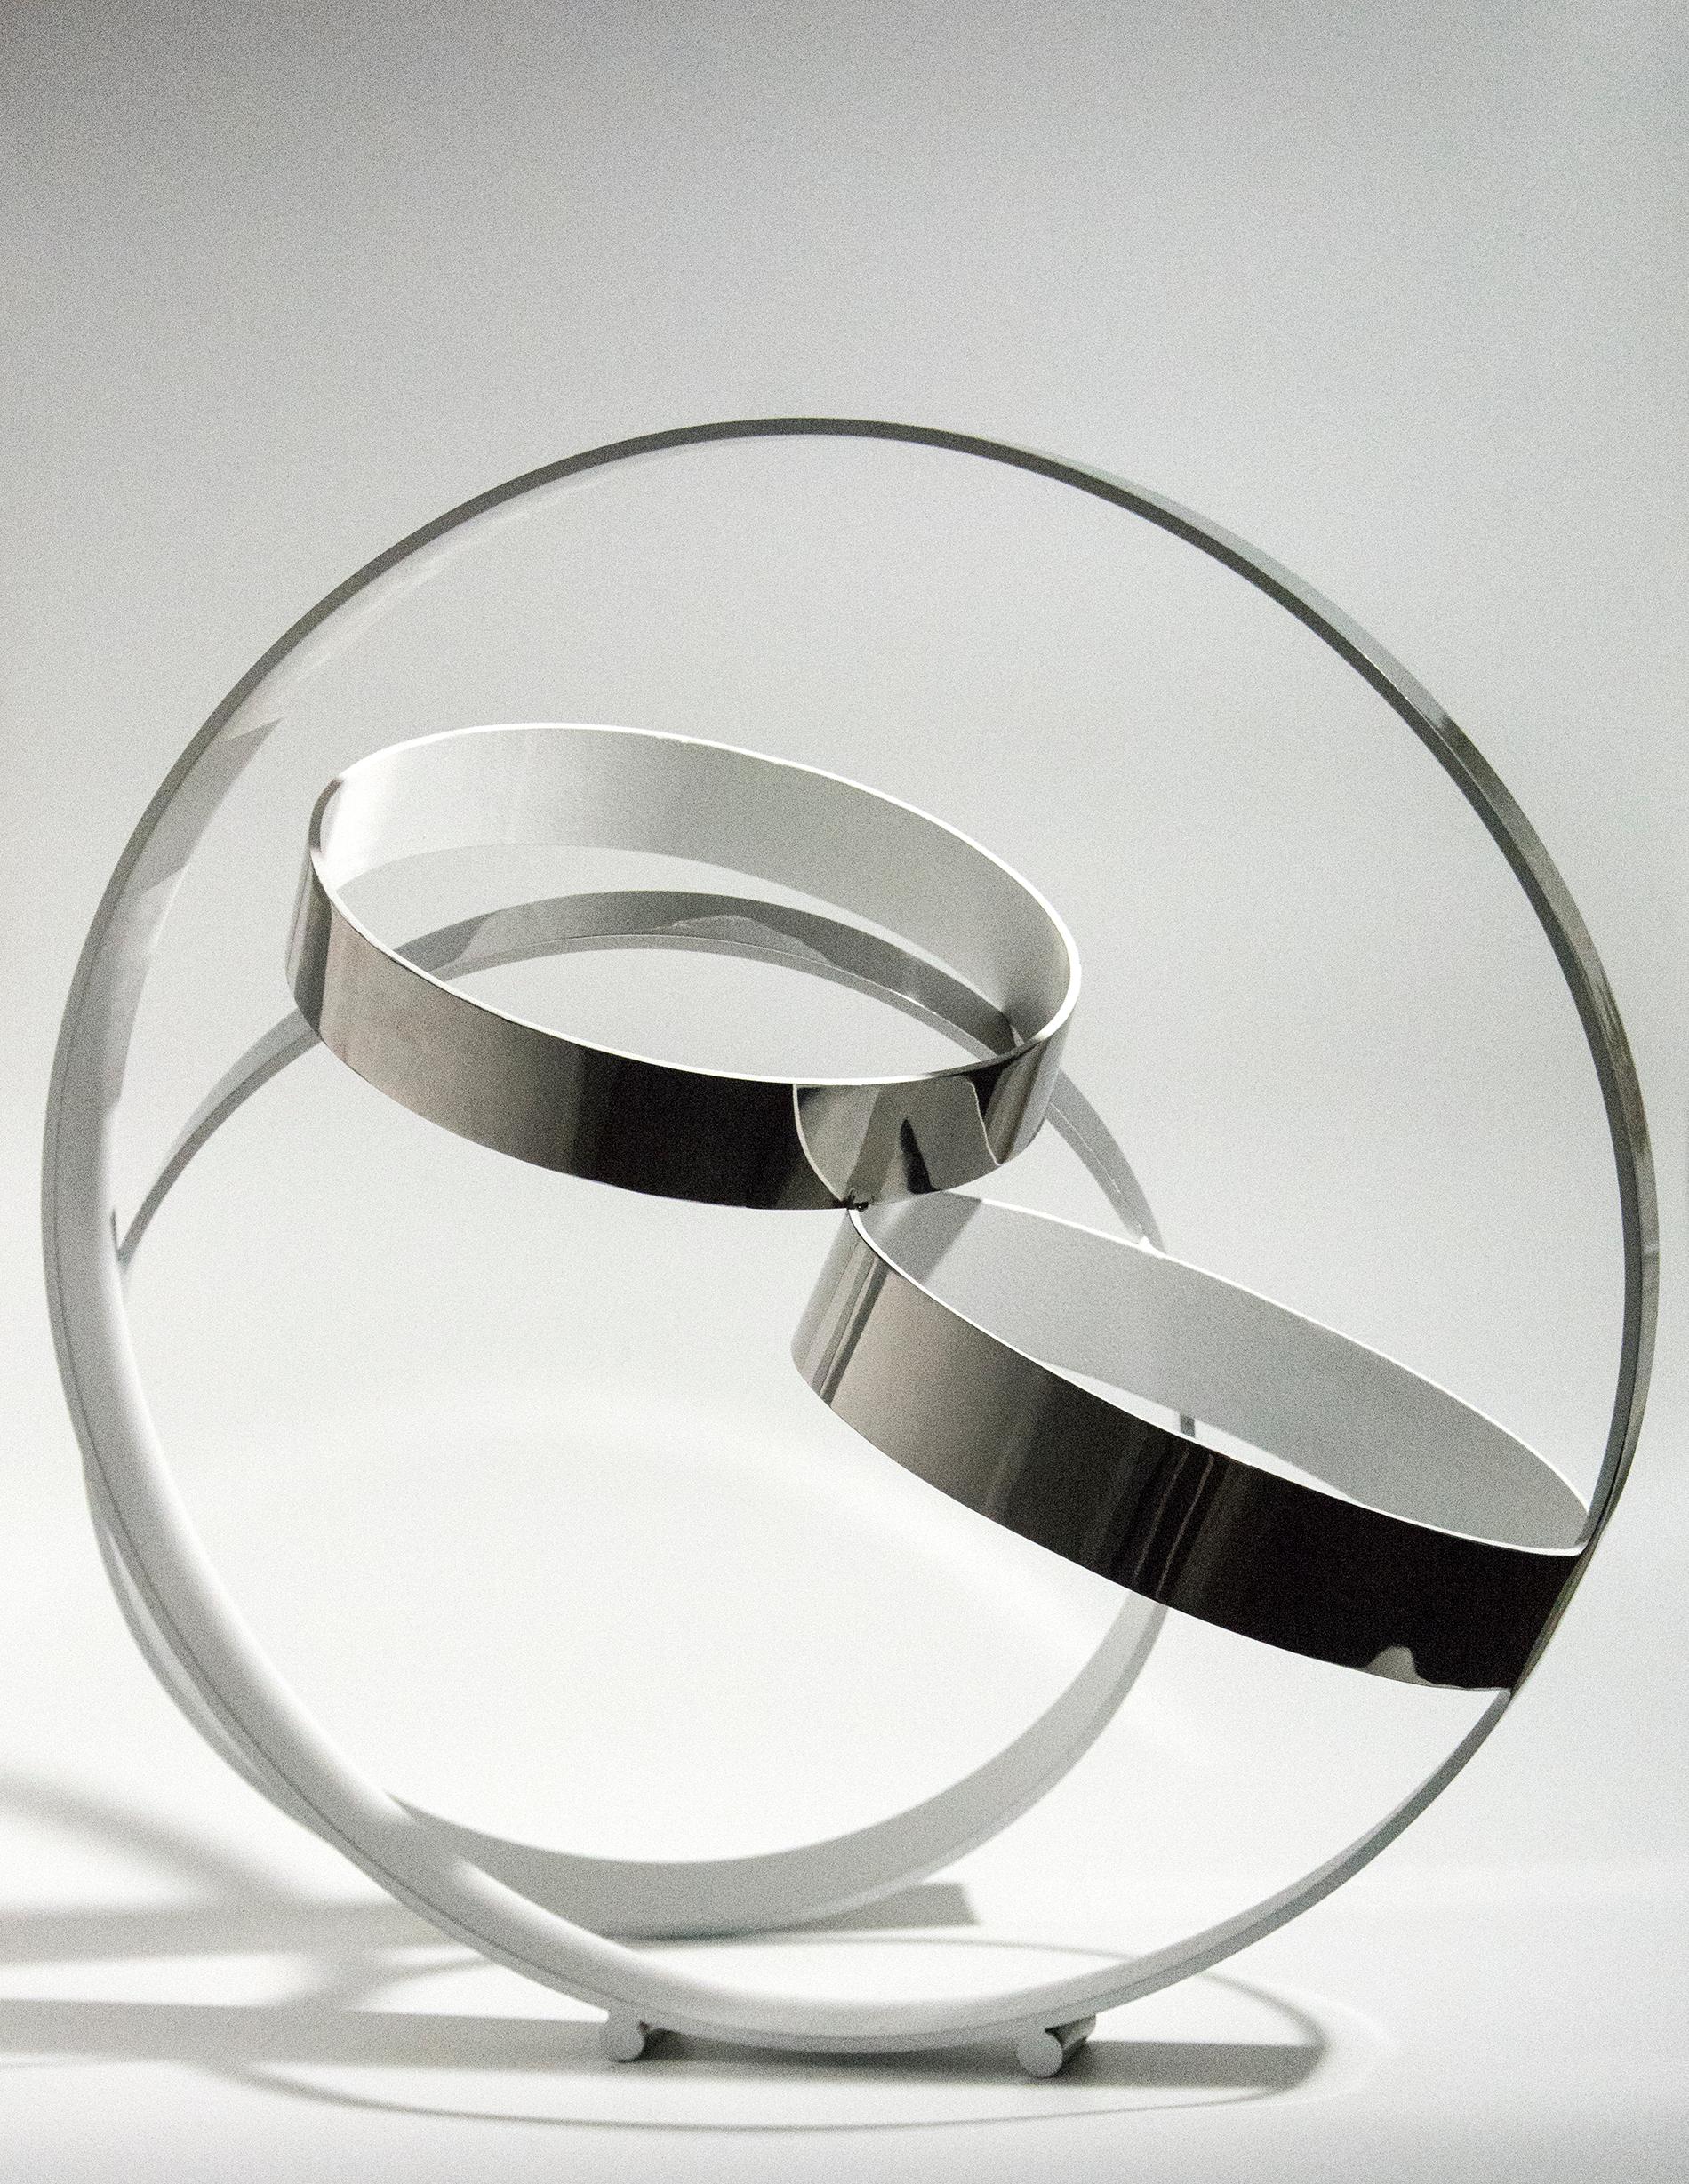 Four Ring Temps Zero White 3/10 - Stainless steel rings with white interior - Gray Abstract Sculpture by Philippe Pallafray